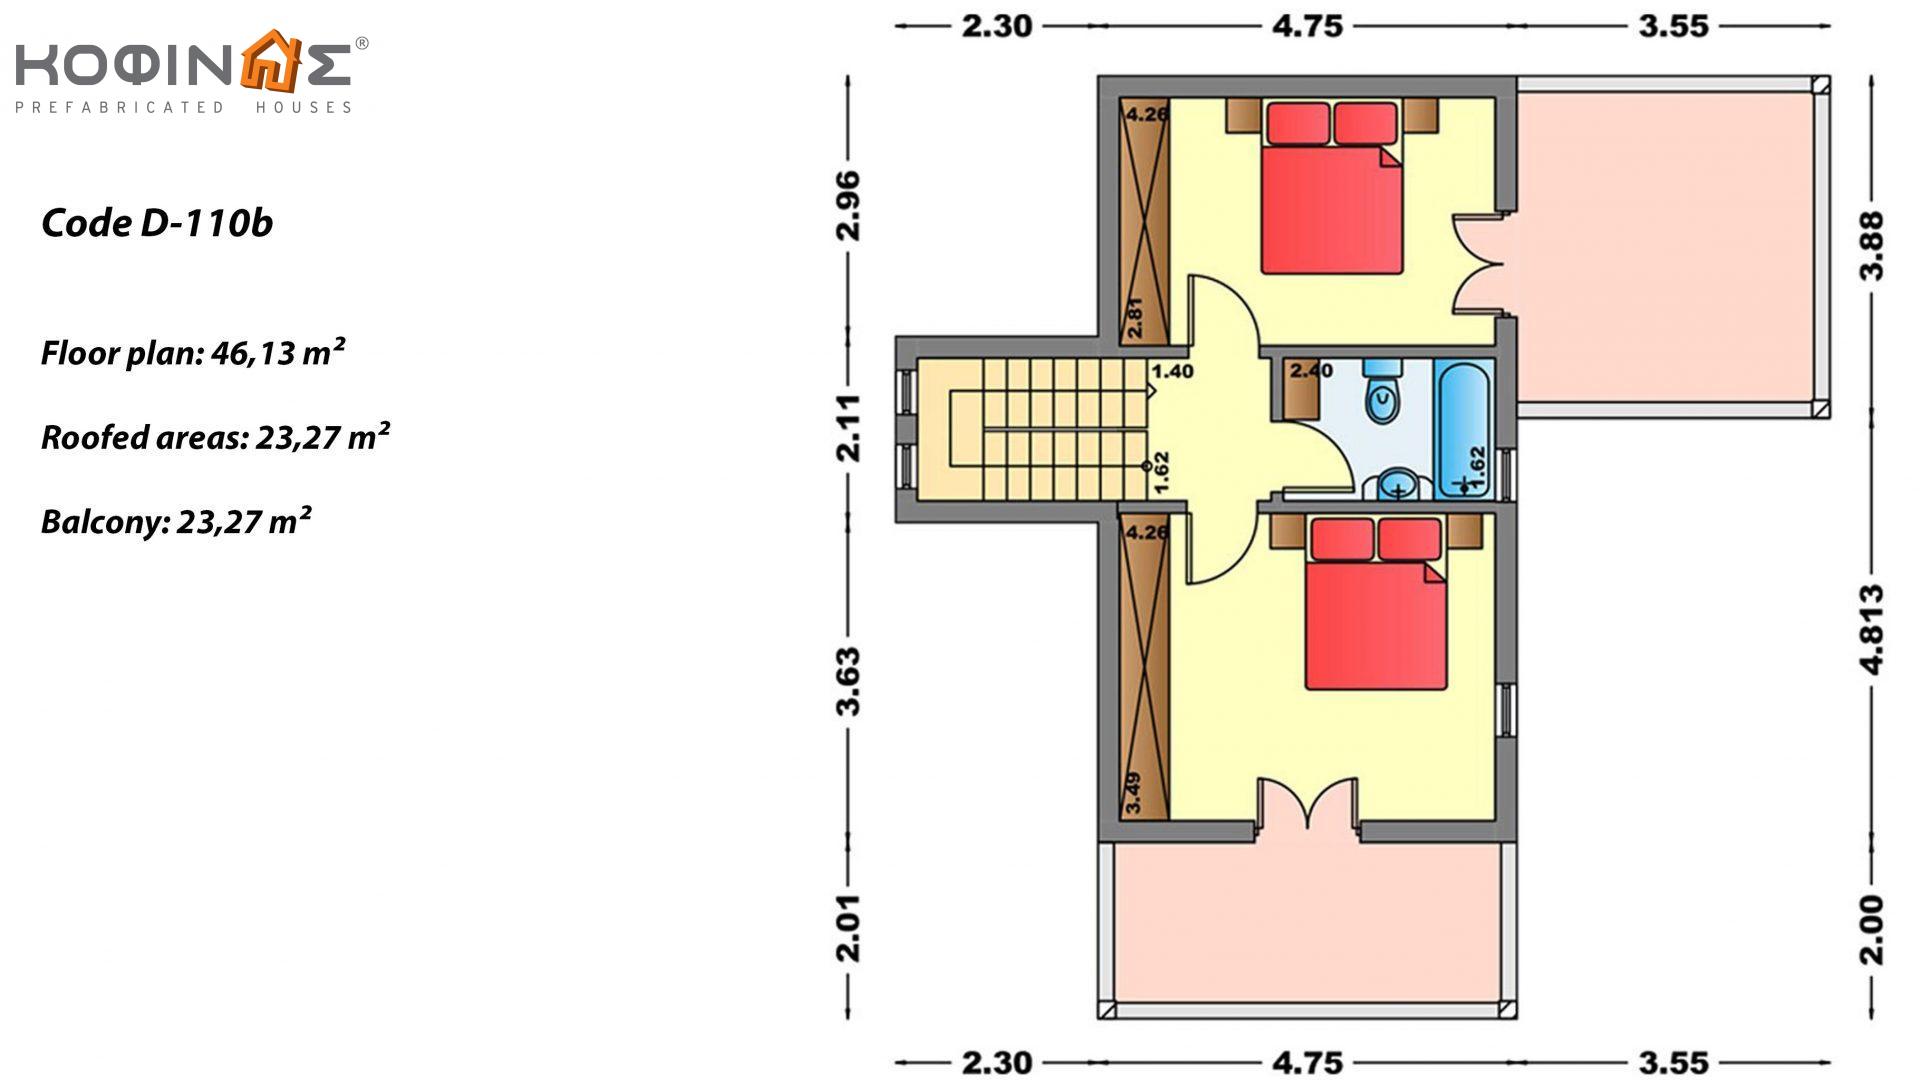 2-story house D-110b, total surface of 110,72 m²,covered roofed areas 42,57 m²,balconies 23,27 m²